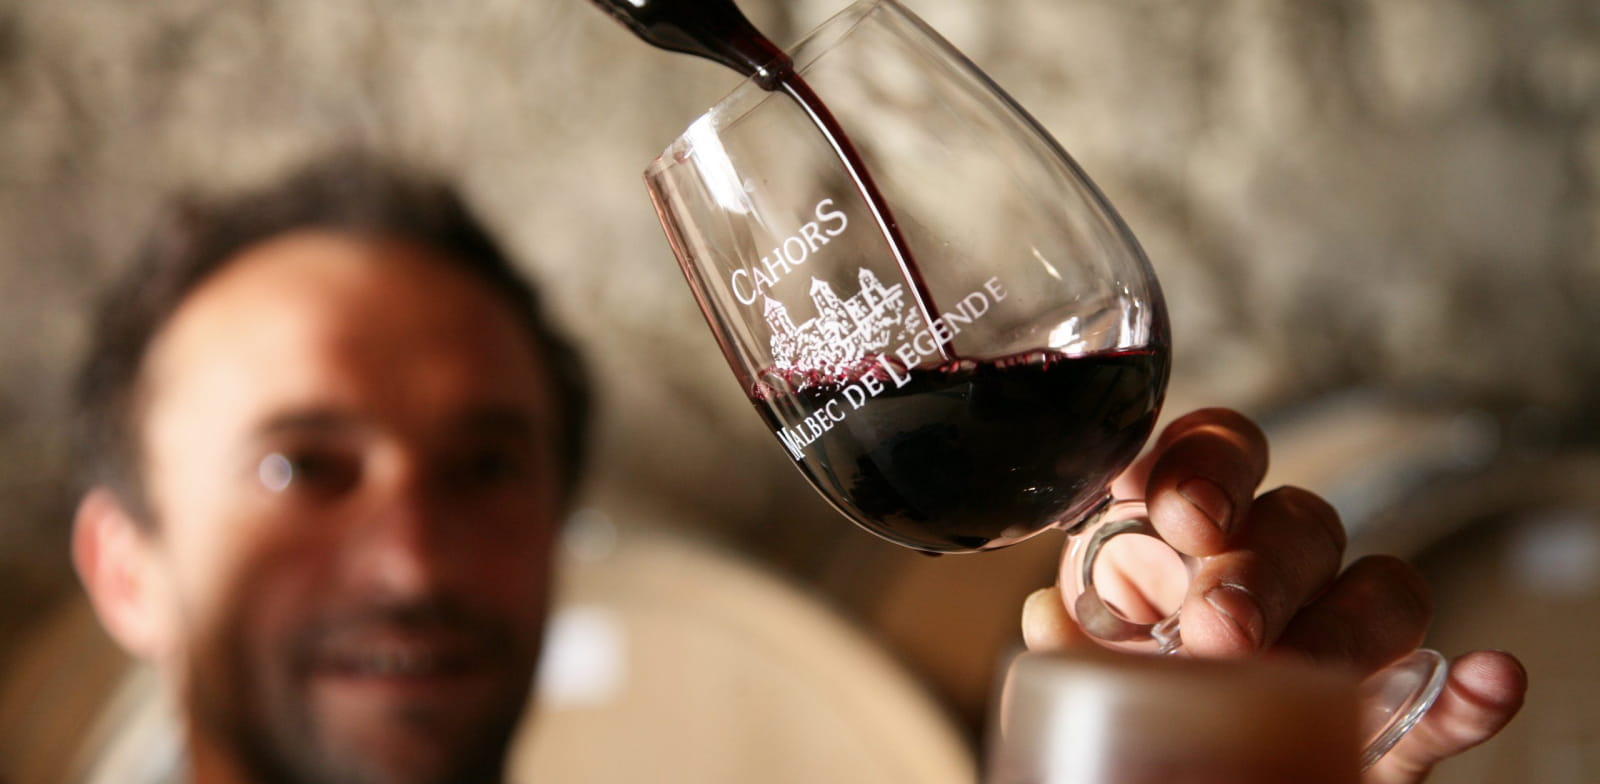 Guided tours and tastings - groups - Cahors-Vallée du Lot